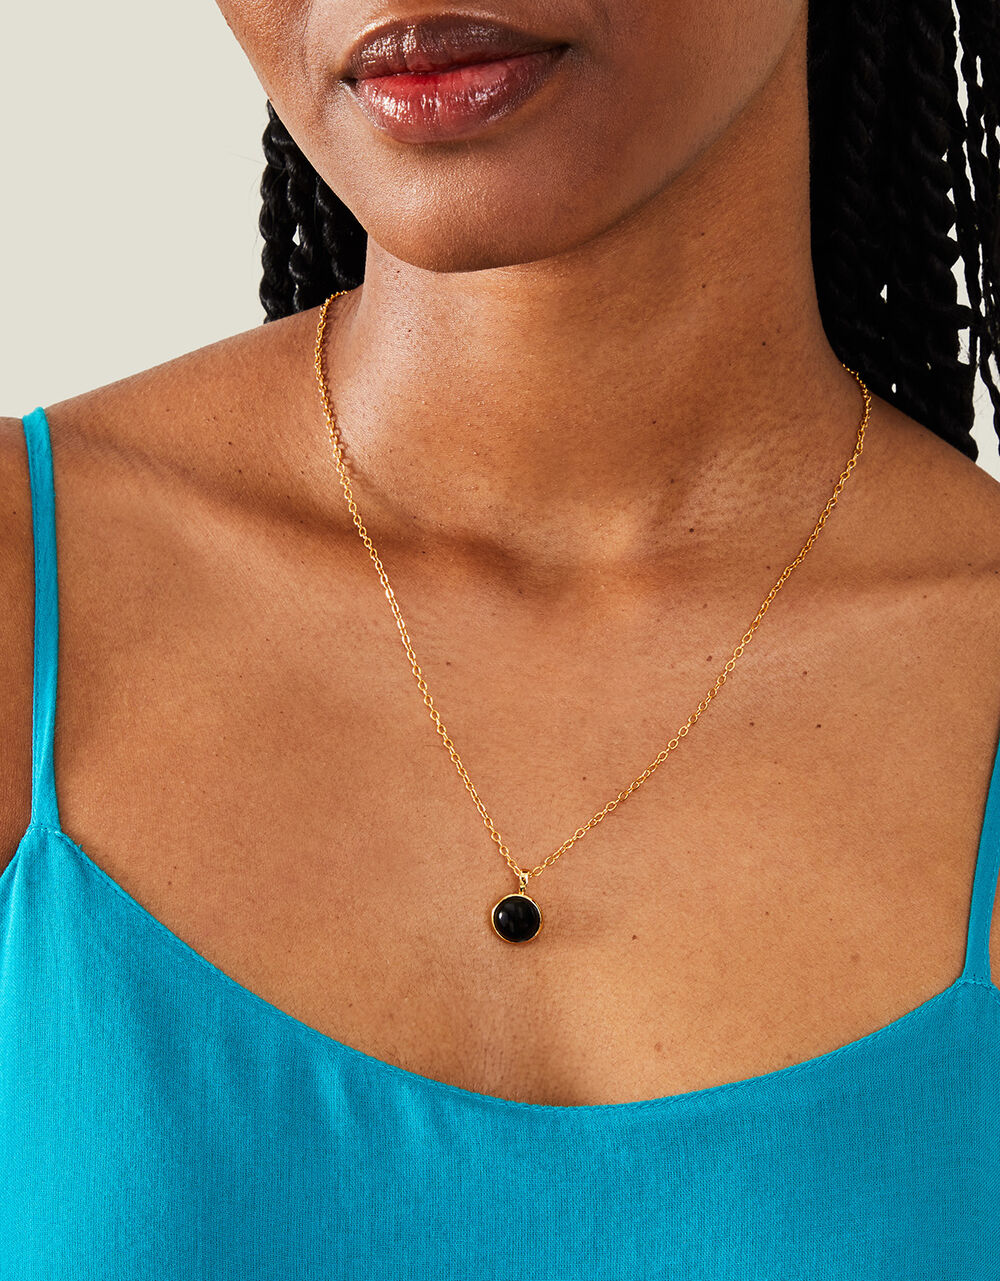 14ct Gold Plated Black Onyx Pendant Necklace